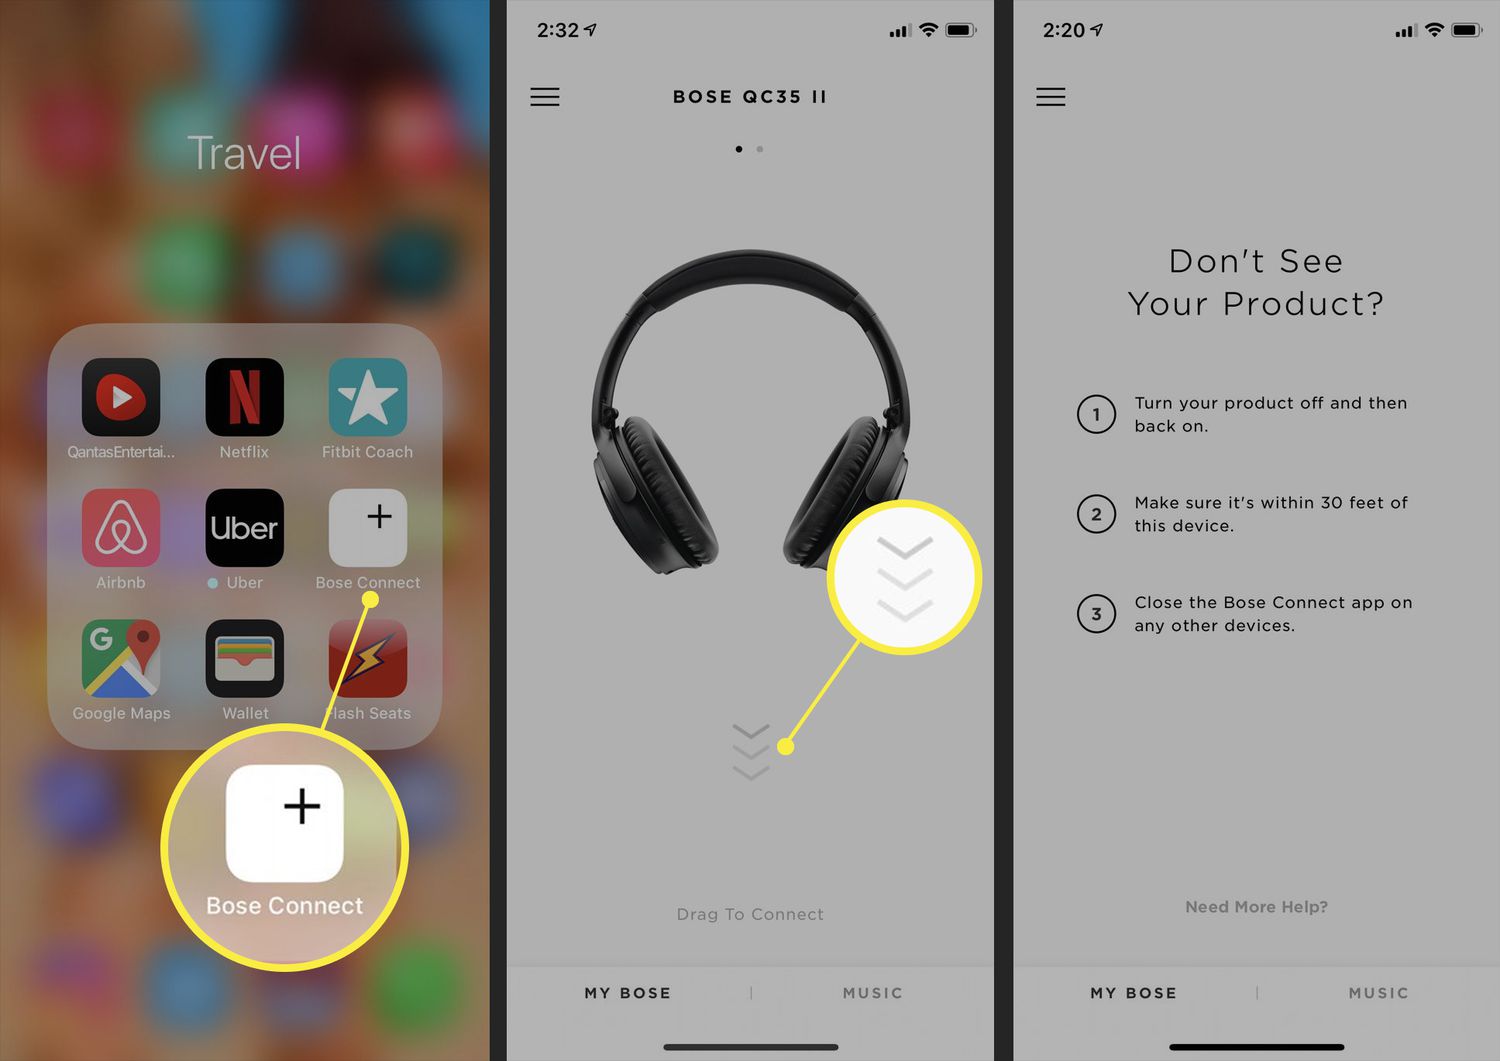 How to Connect Bose Headphones to Iphone